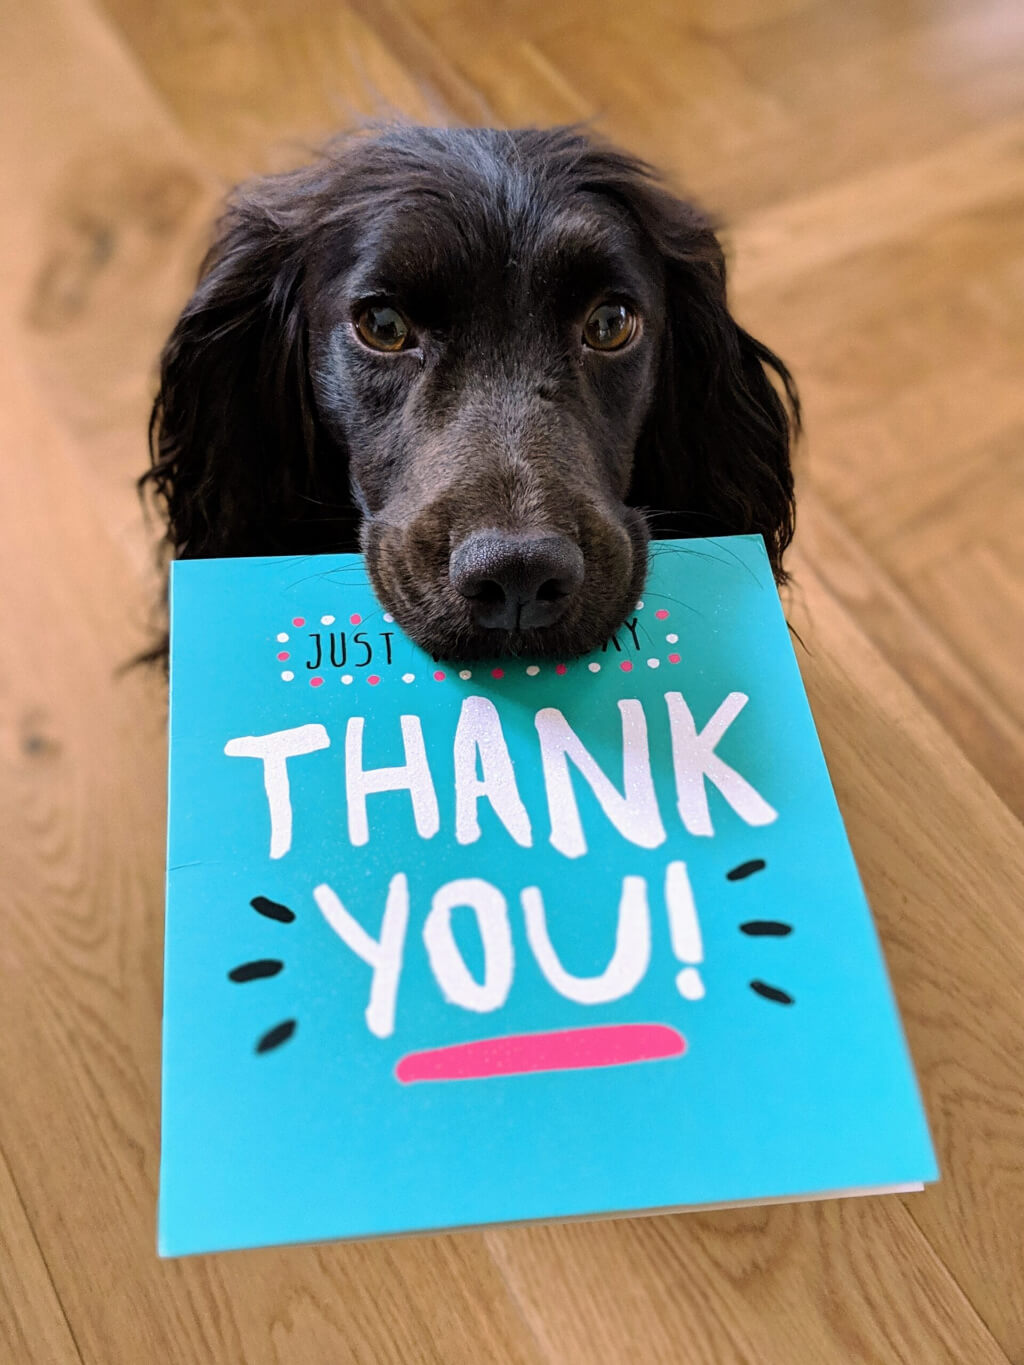 A dog holding a thank you placard in his mouth